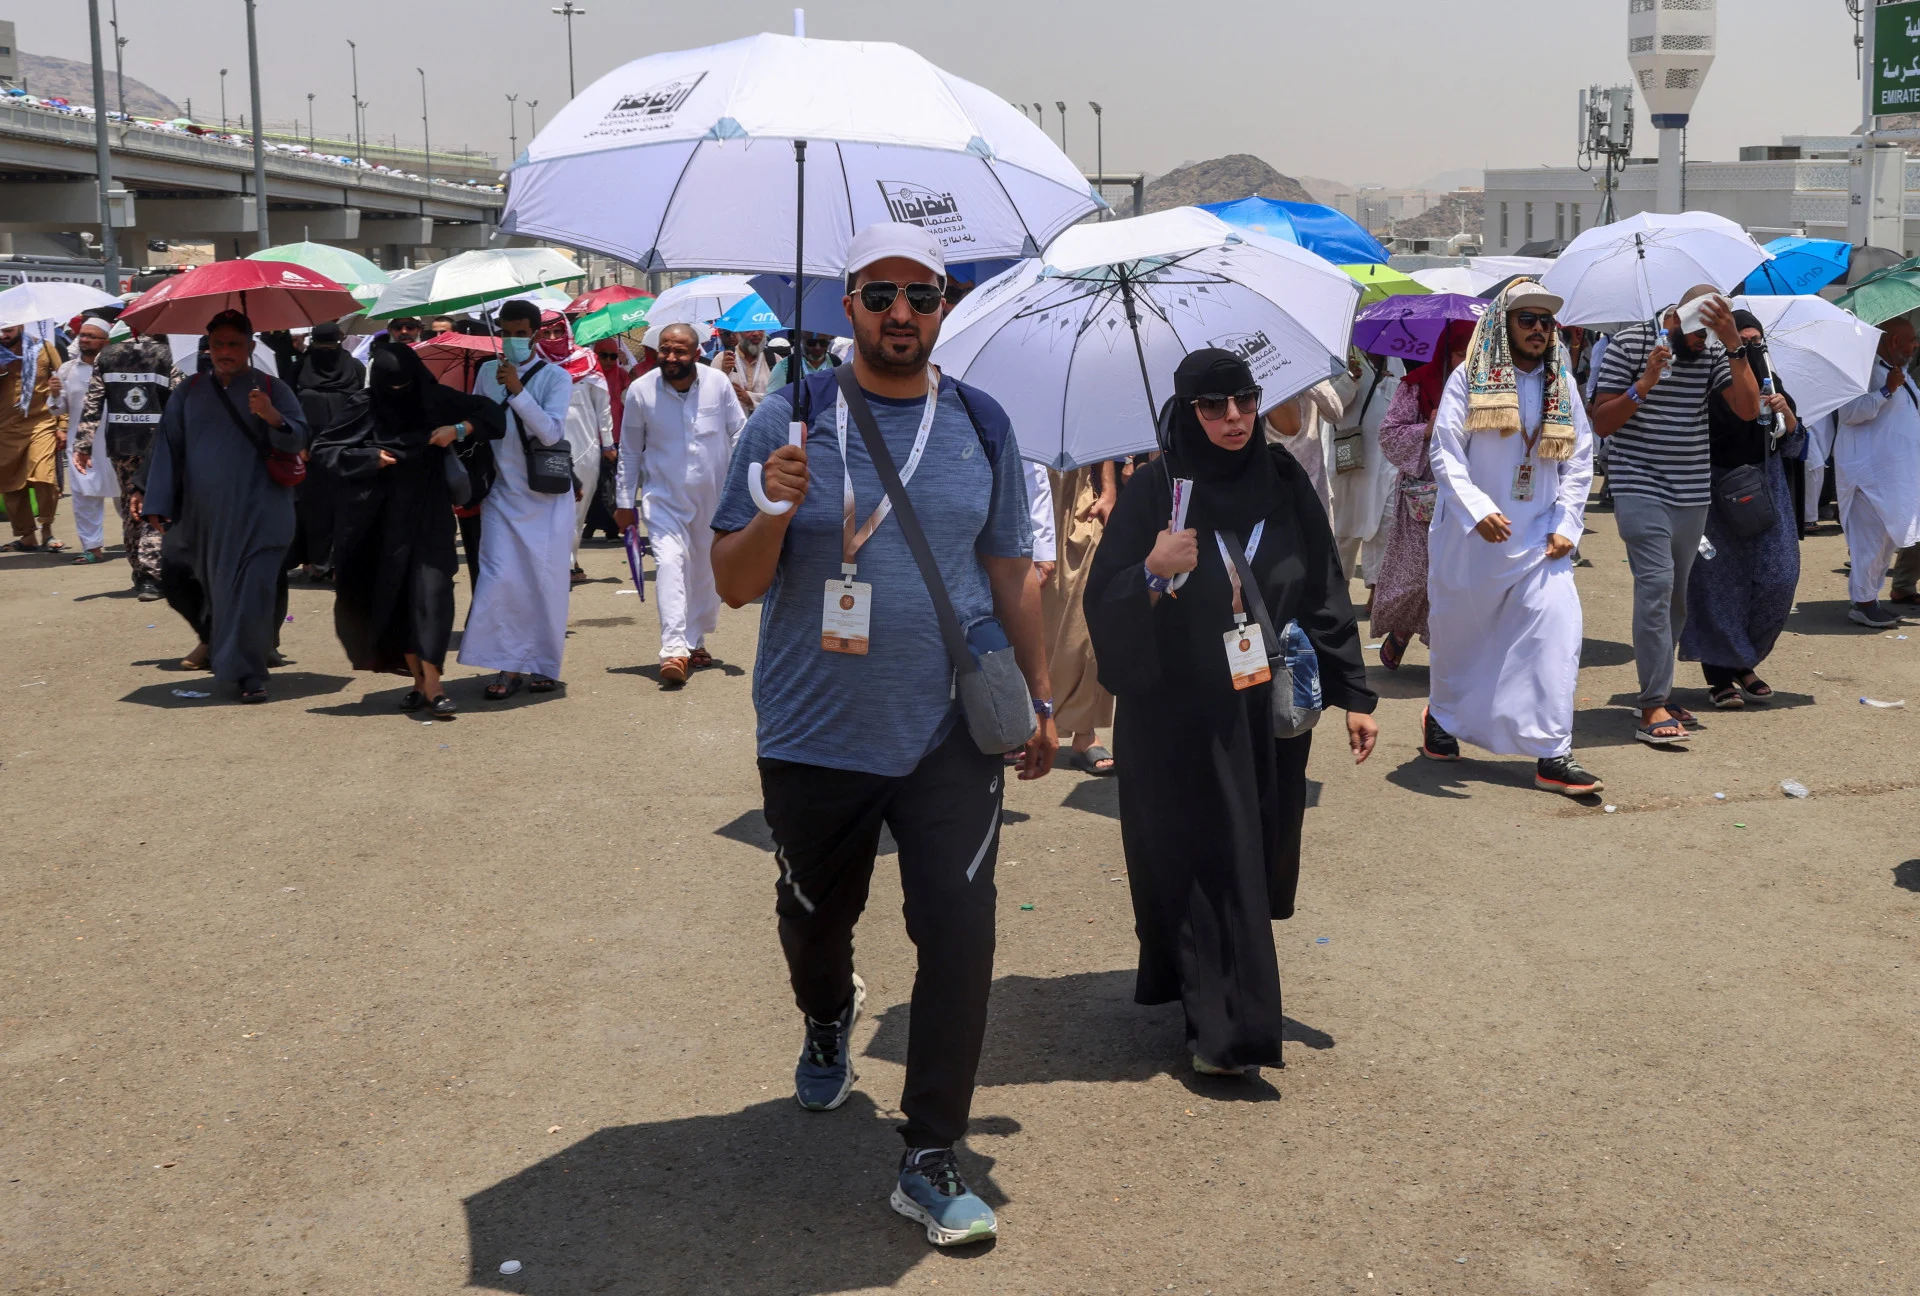 Climate change threat hangs over hajj pilgrimage as hundreds perish in heat